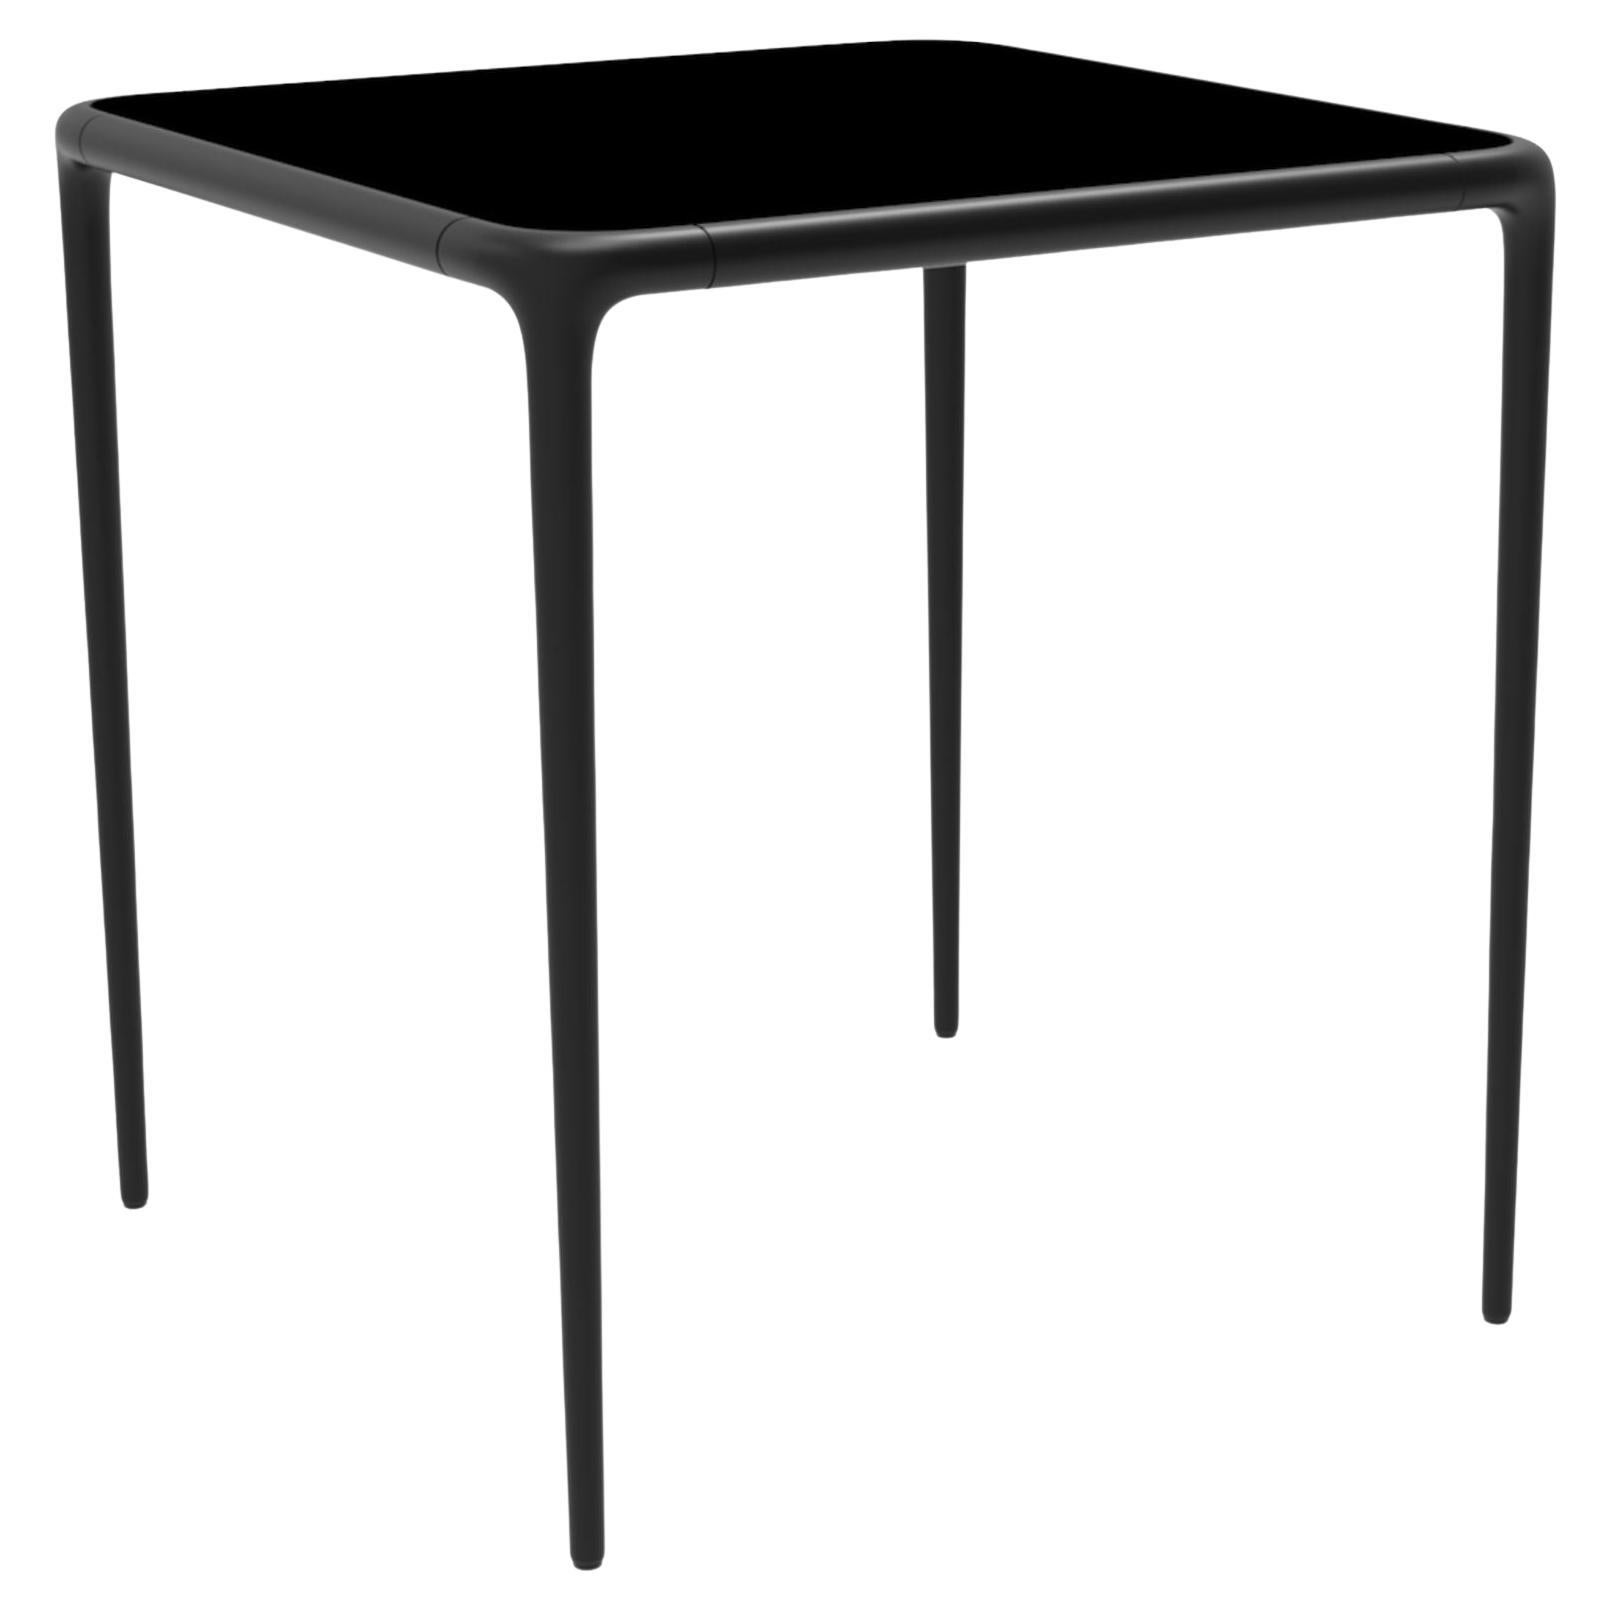 Xaloc Black Glass Top Table 70 by Mowee For Sale